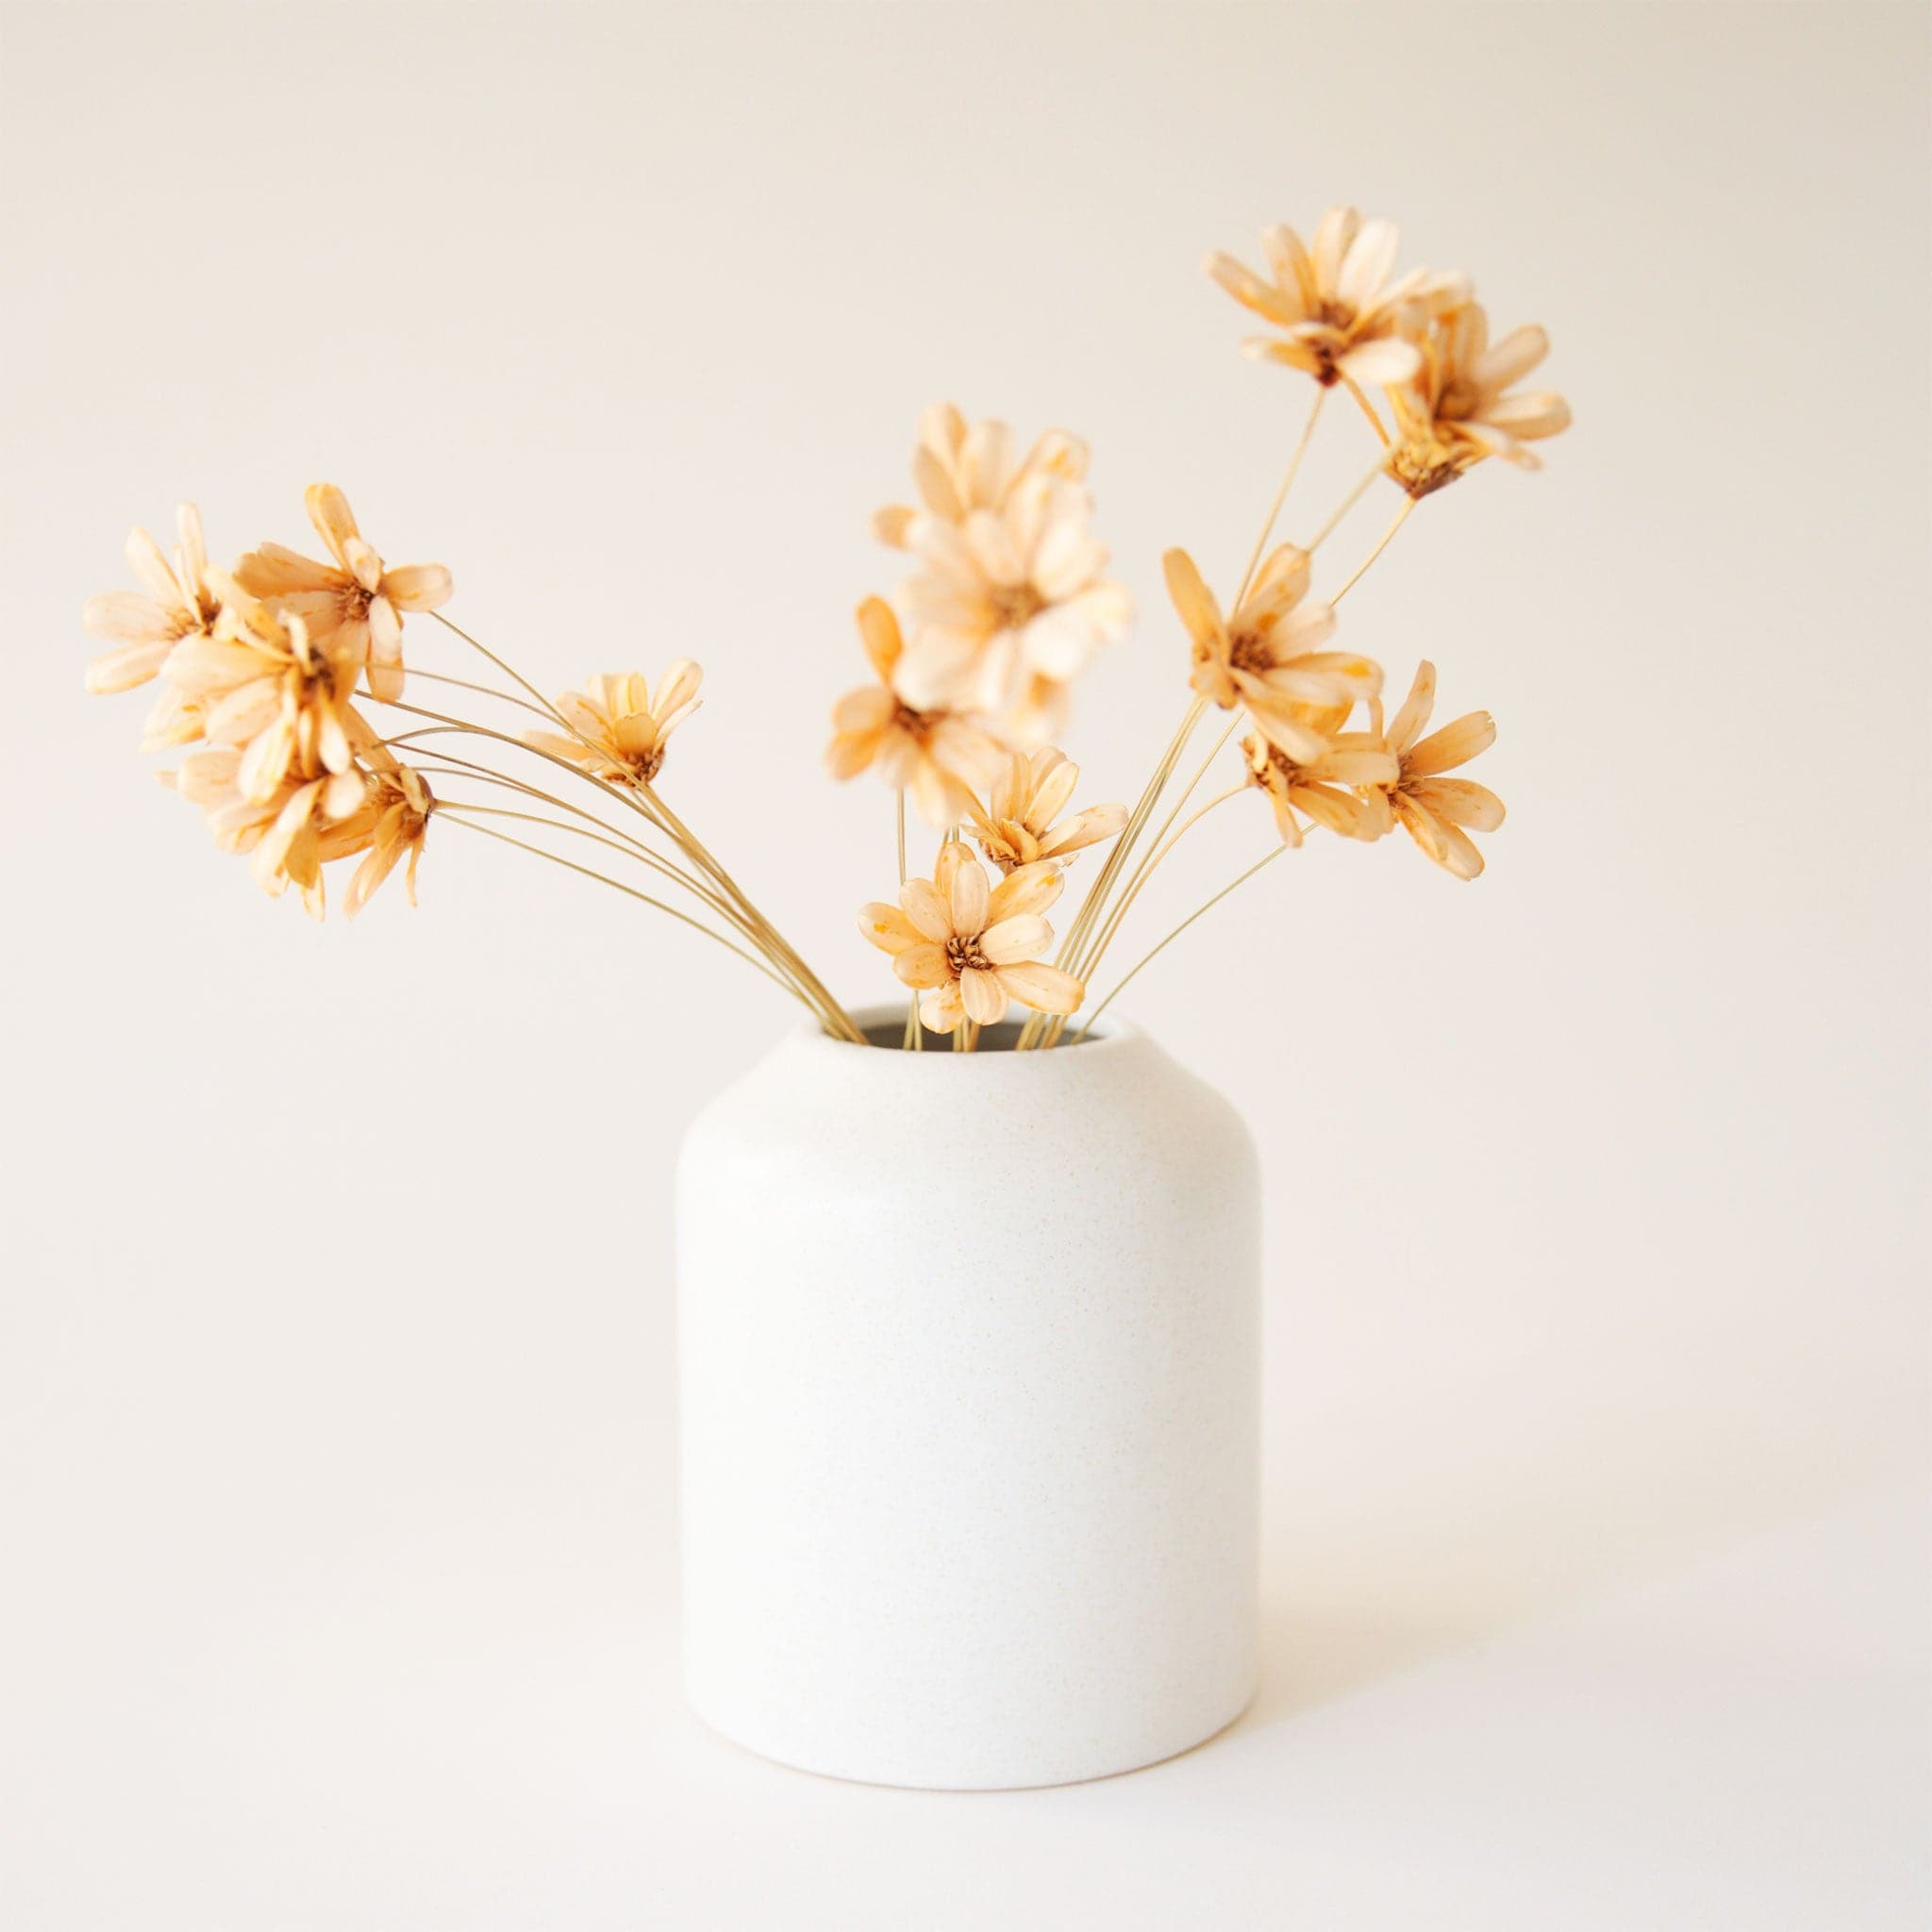 On a cream background is a white short ceramic vase with an opening at the top and staged with dried florals. 